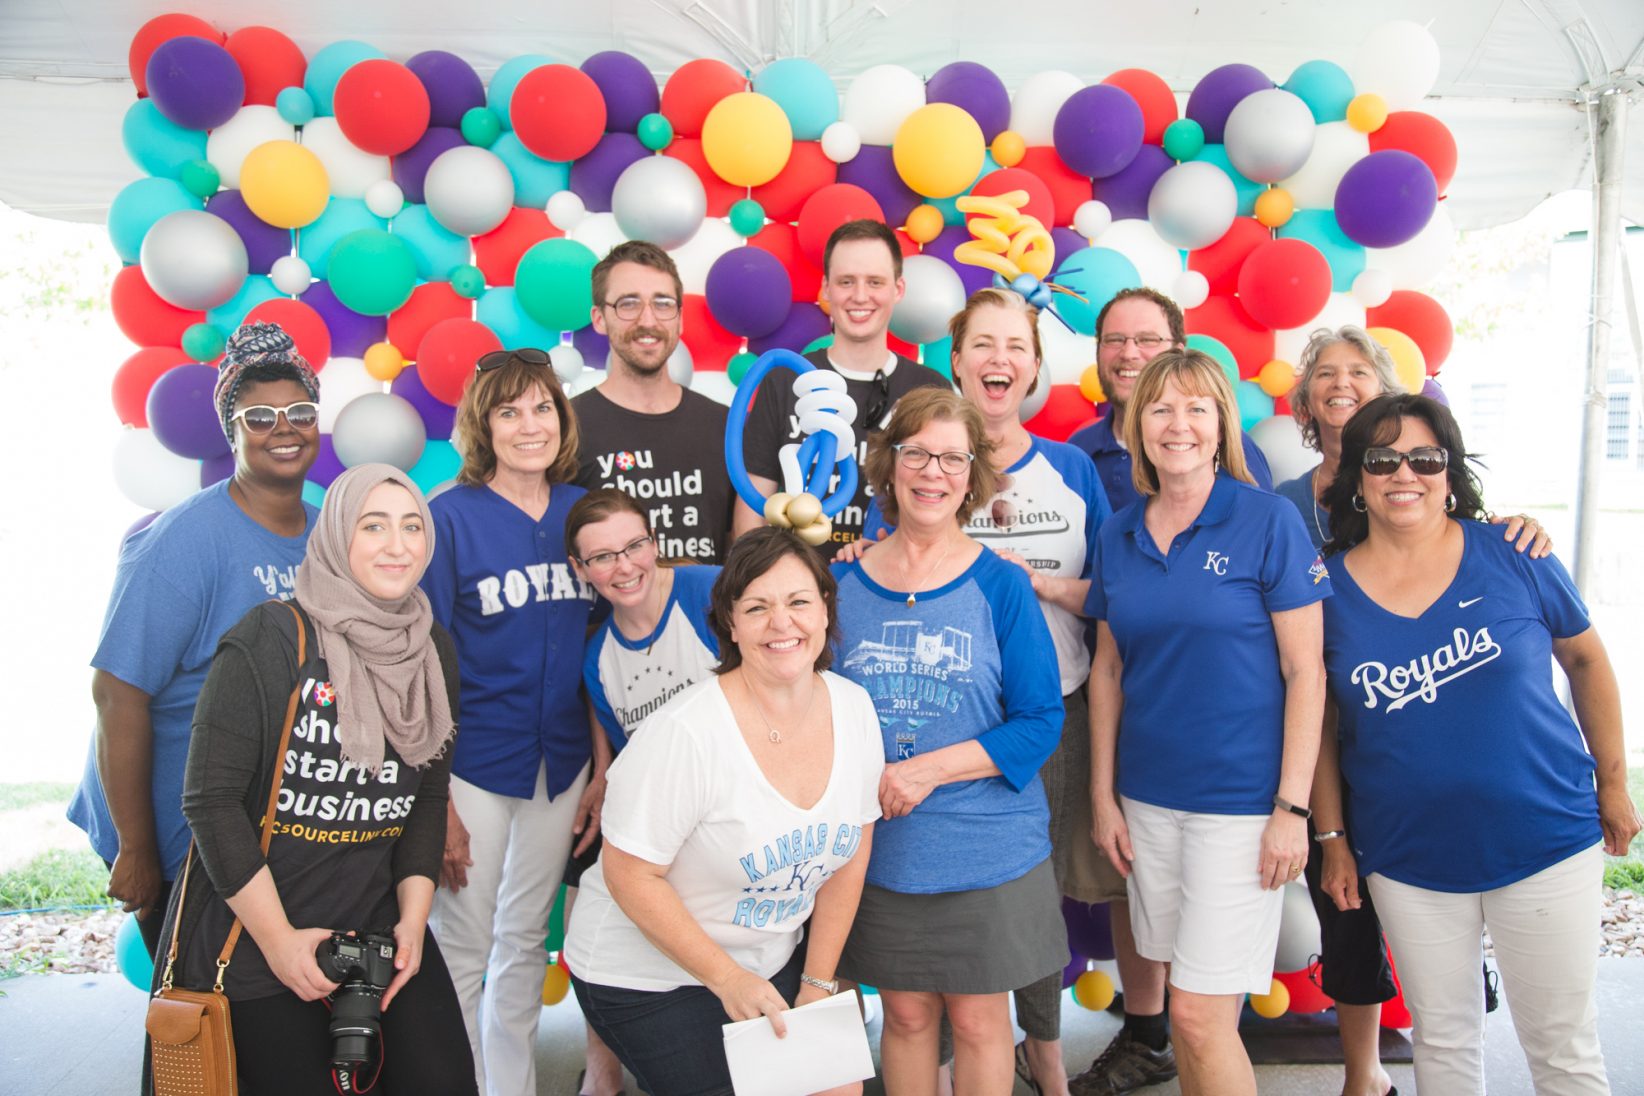 All-Star voting winners: E-Day at the K celebrates KCSourceLink, its network (Photos)